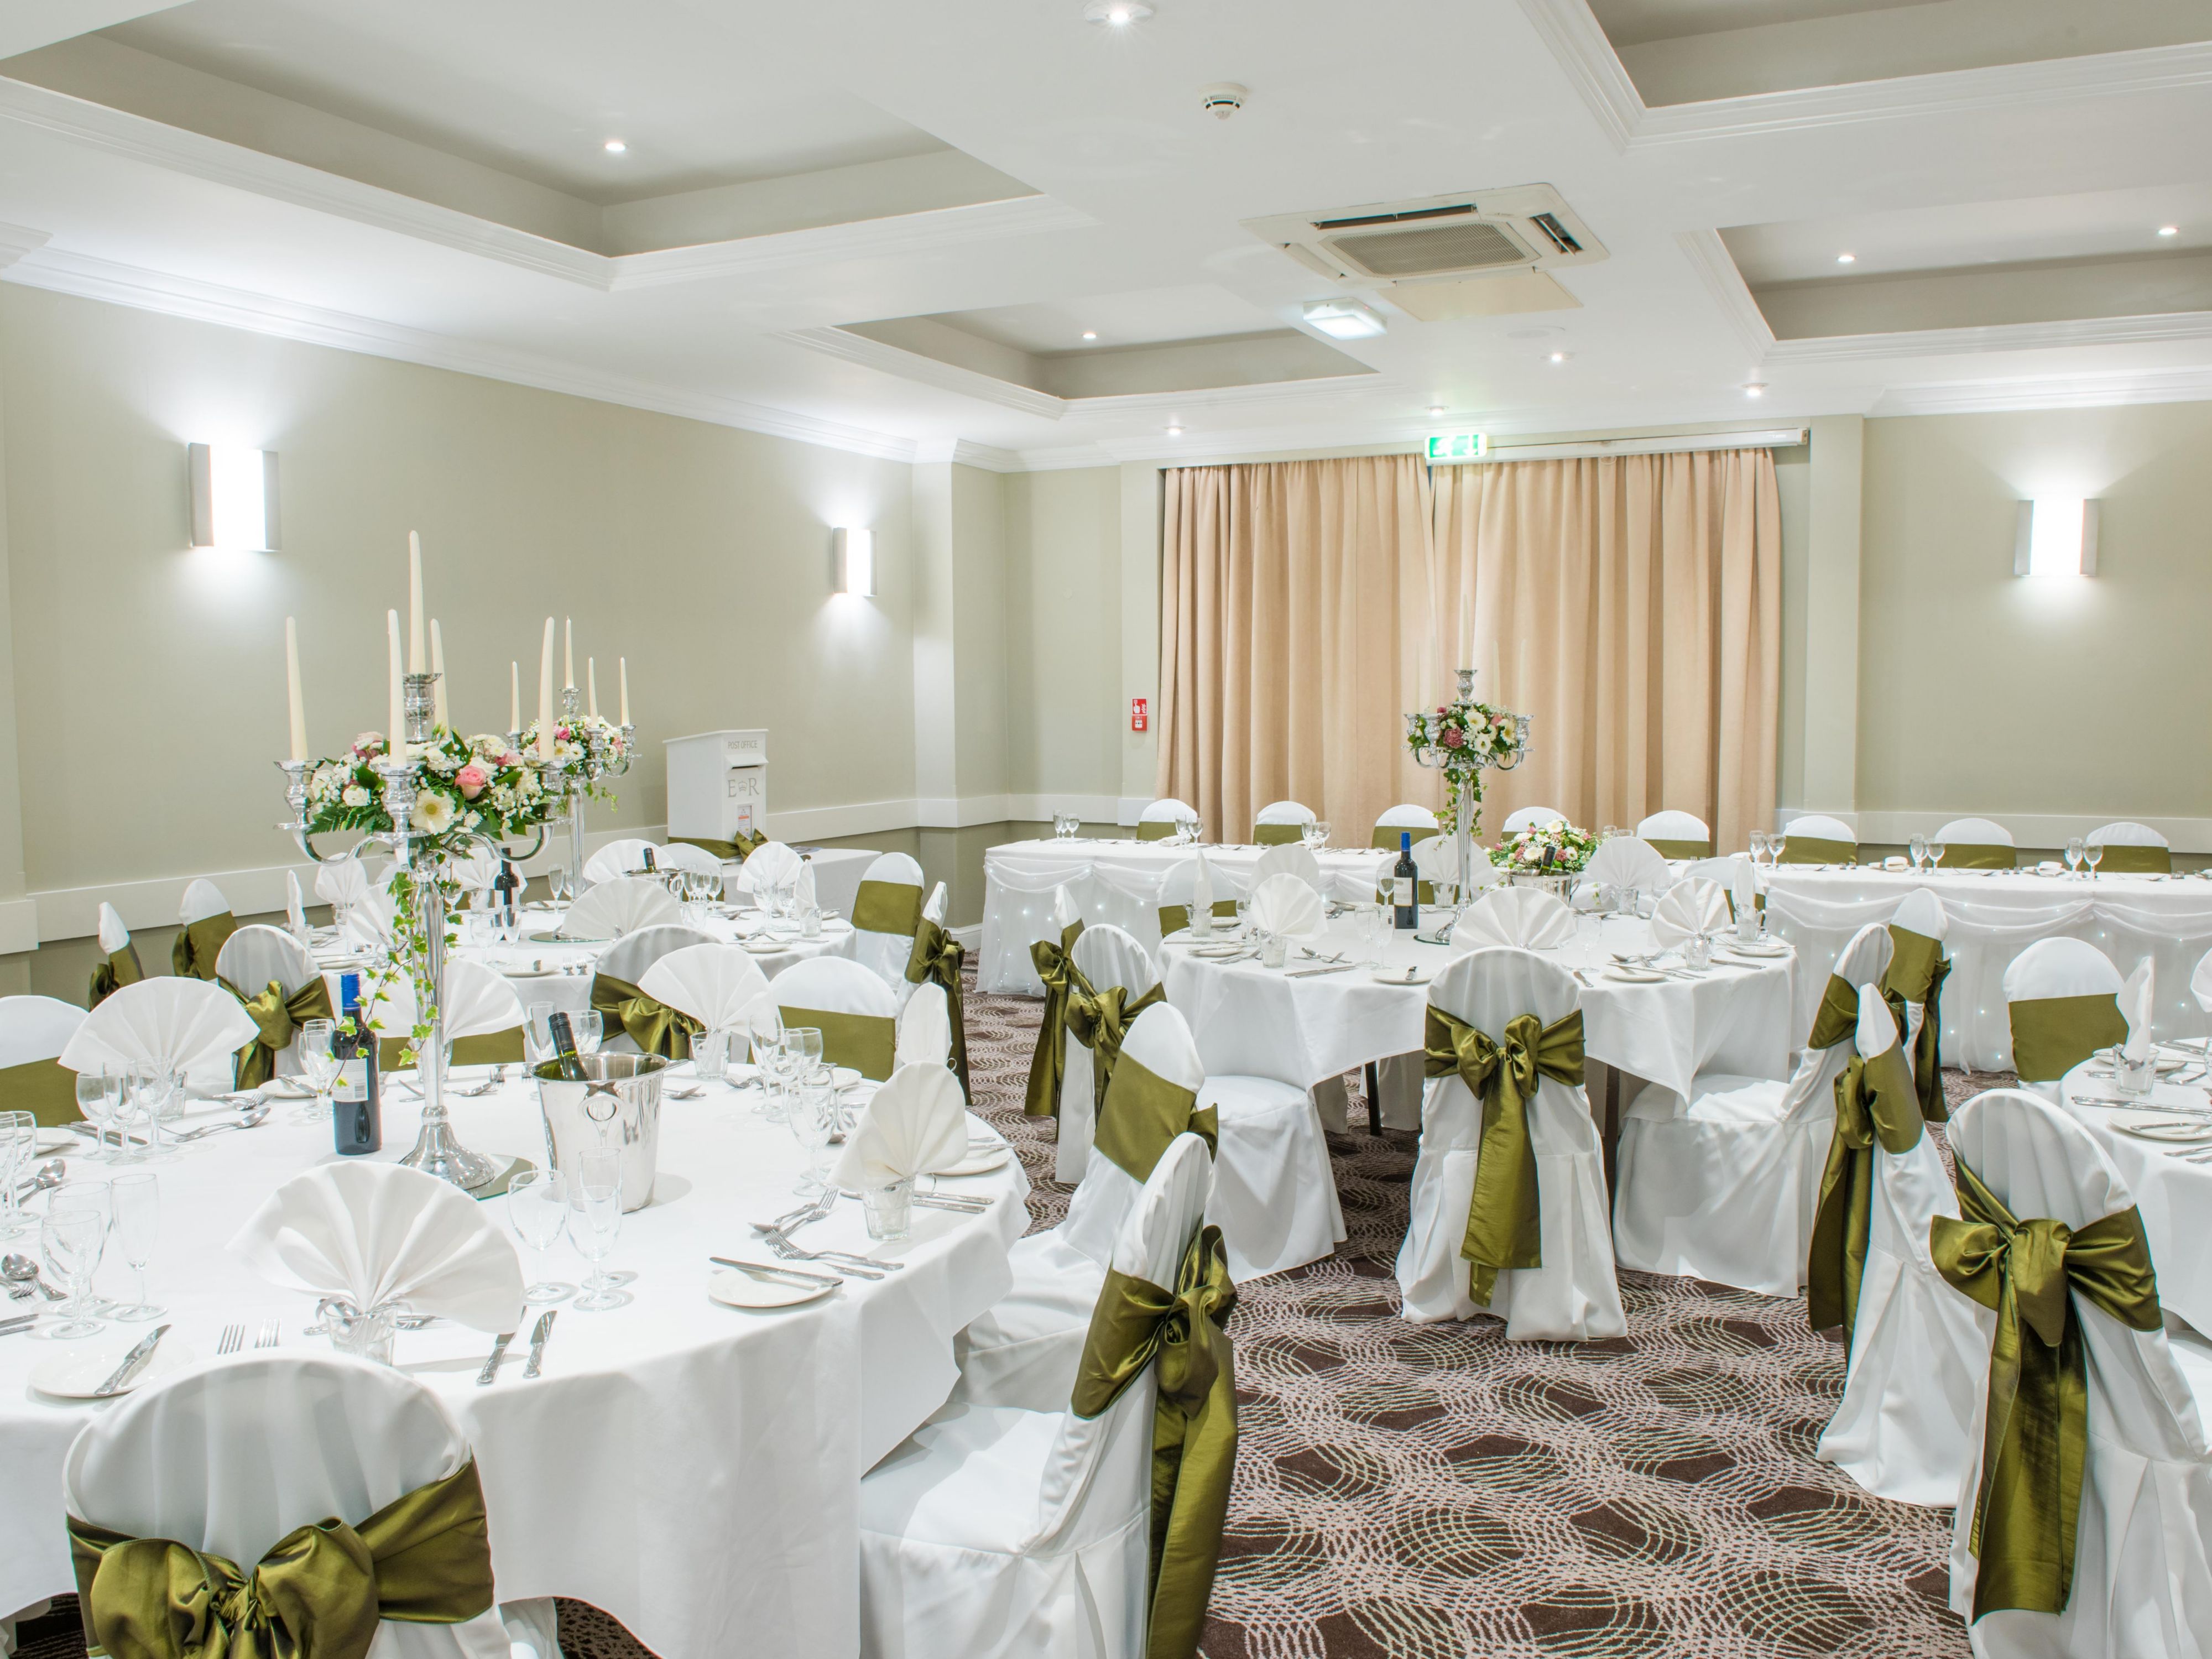 Holiday Inn Cardiff North we pride ourselves on being one of the area’s premier wedding venues. Licensed to care for every detail our impressive function suites have their own unique character and features. Allowing us to tailor your wedding exactly the way you have dreamed it will be.